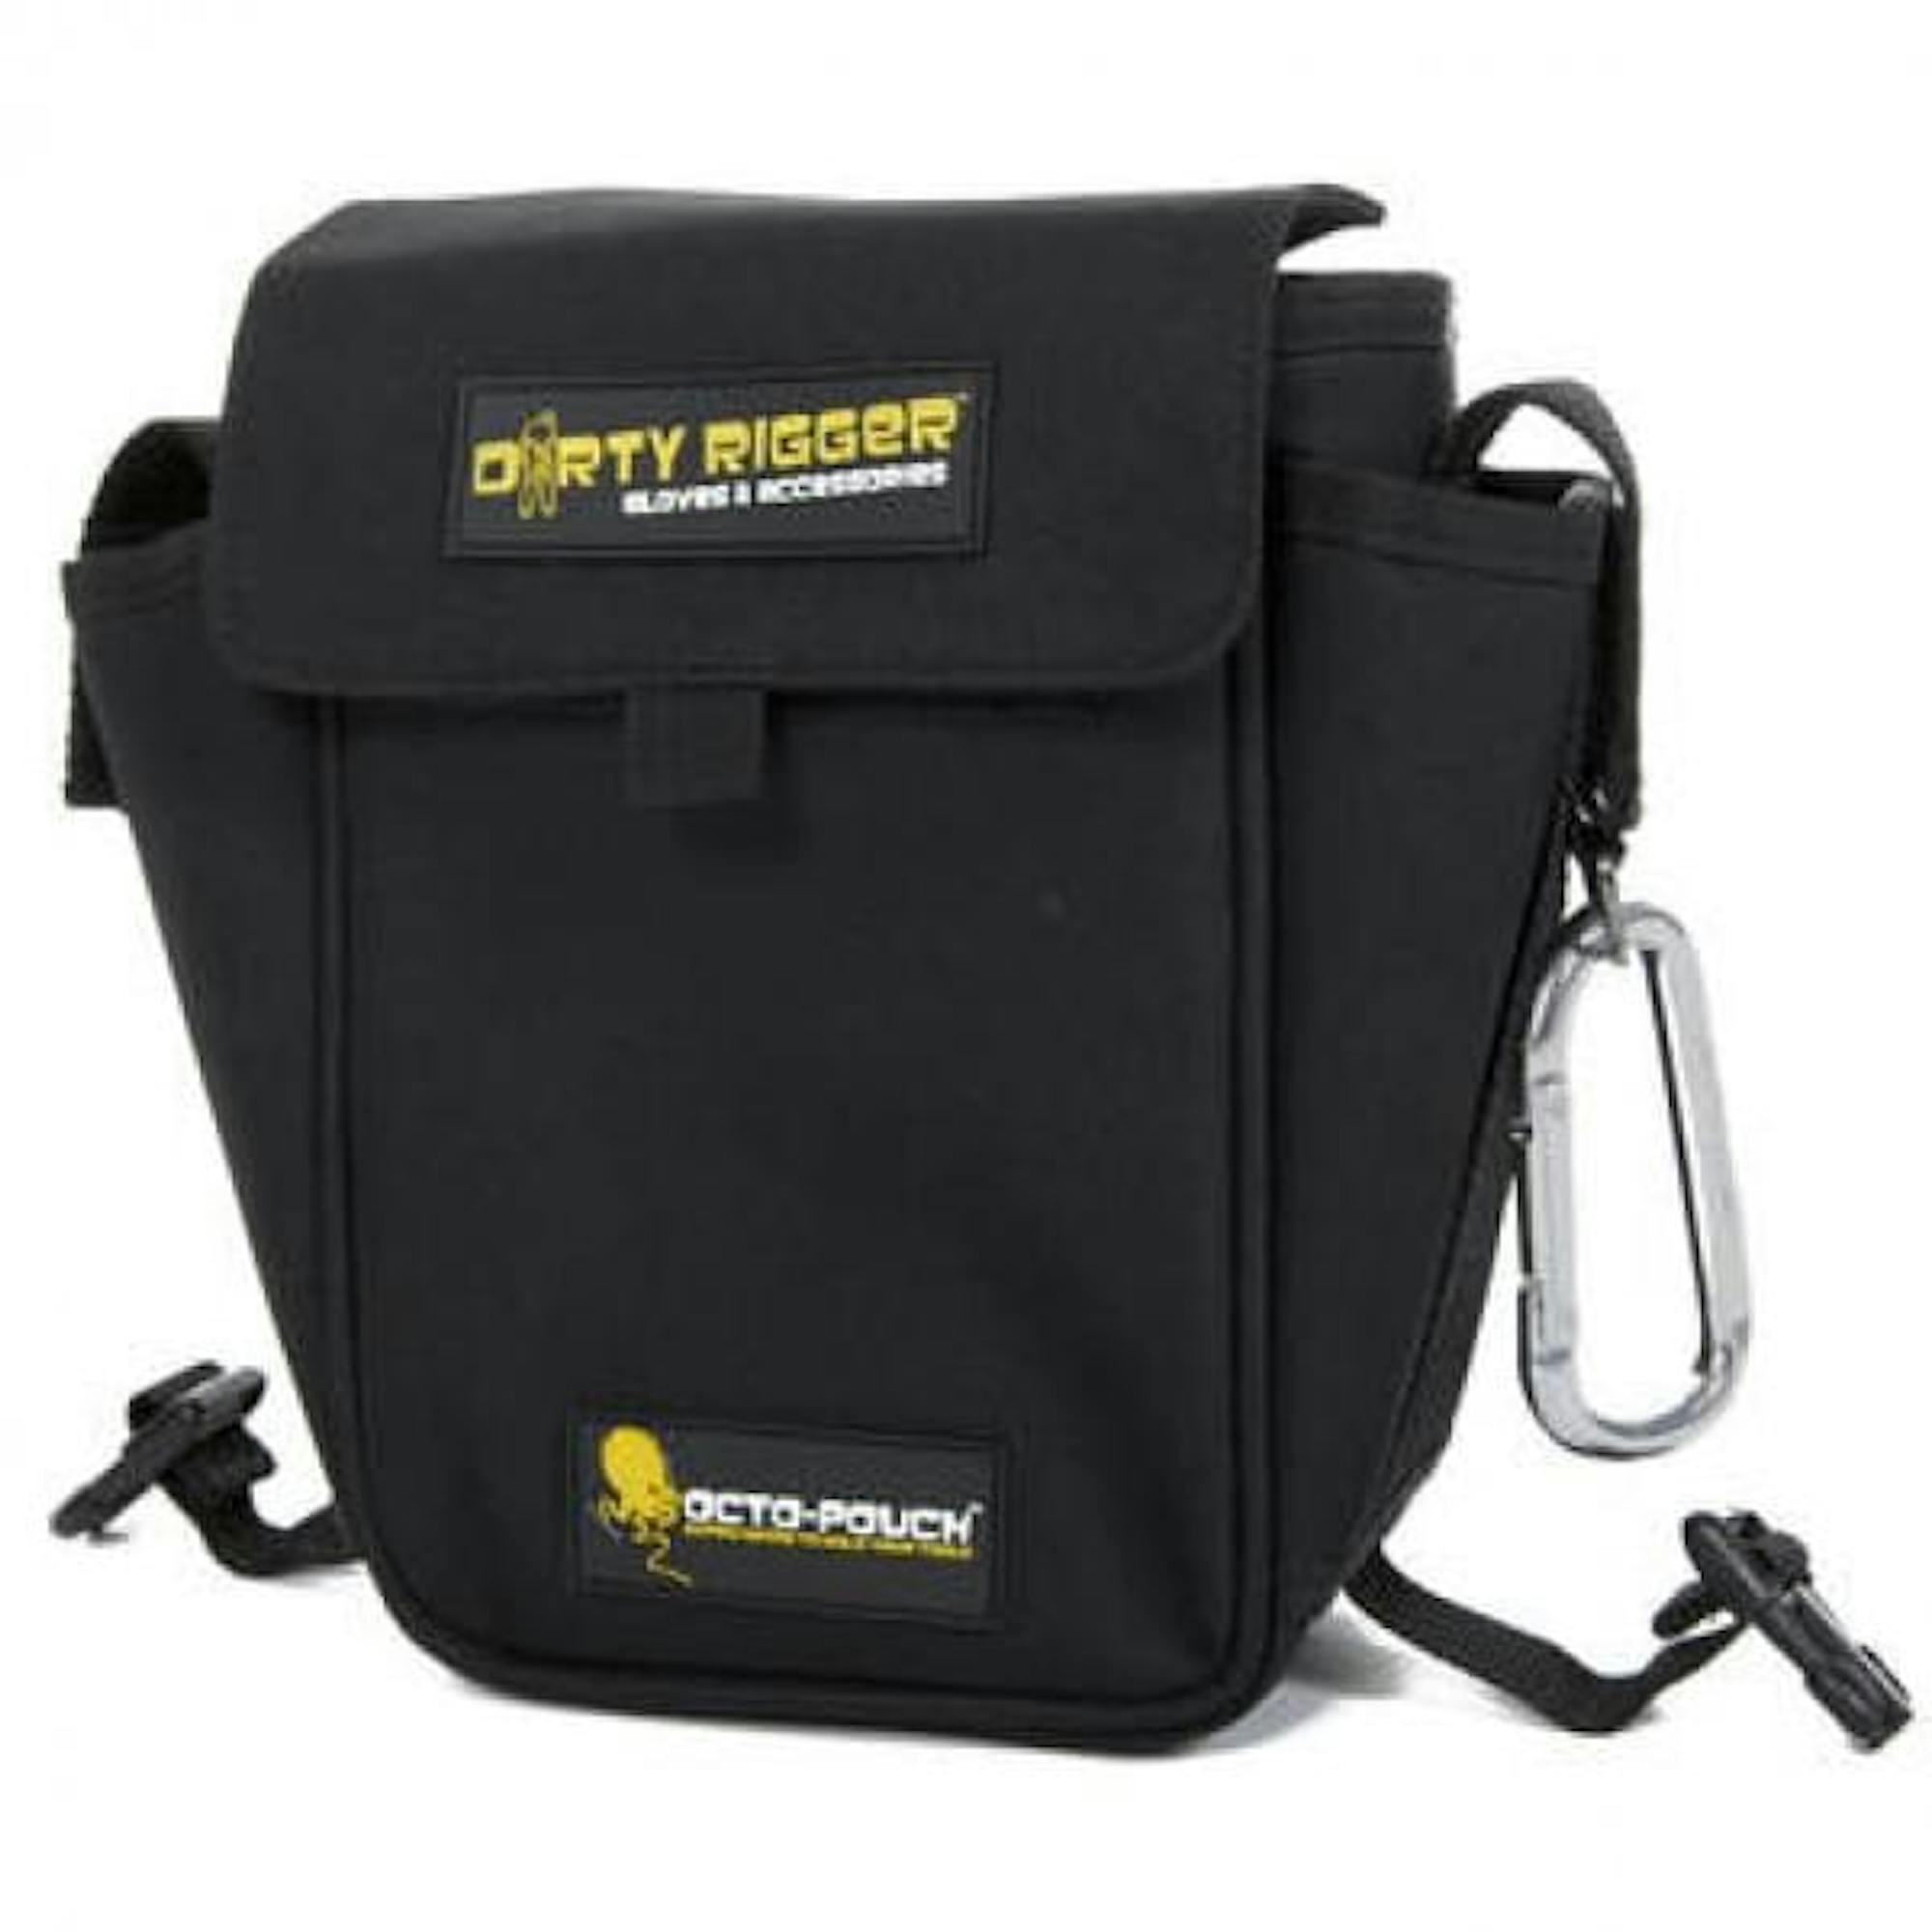 https://vdctrading.imgix.net/products/large/1410113823-dirty%20rigger%20octopouch.jpg?w=2000&h=2000&fit=crop&auto=format,ehance,compress